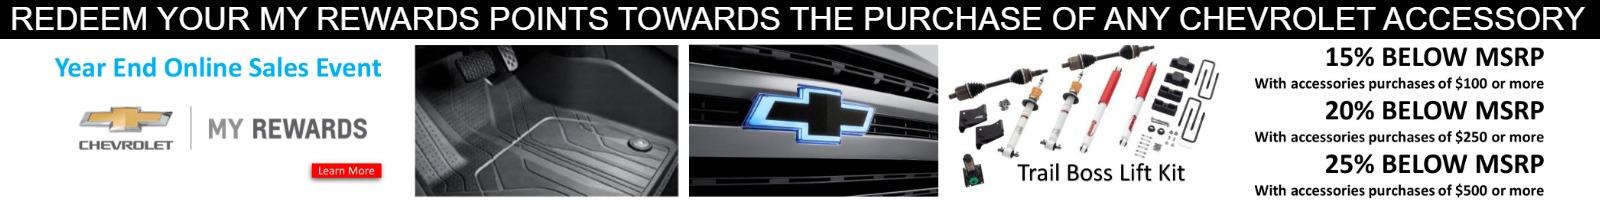 Year End Online Sales event, Redeem Your My Reward points towards the purchase of any Chevrolet accessory